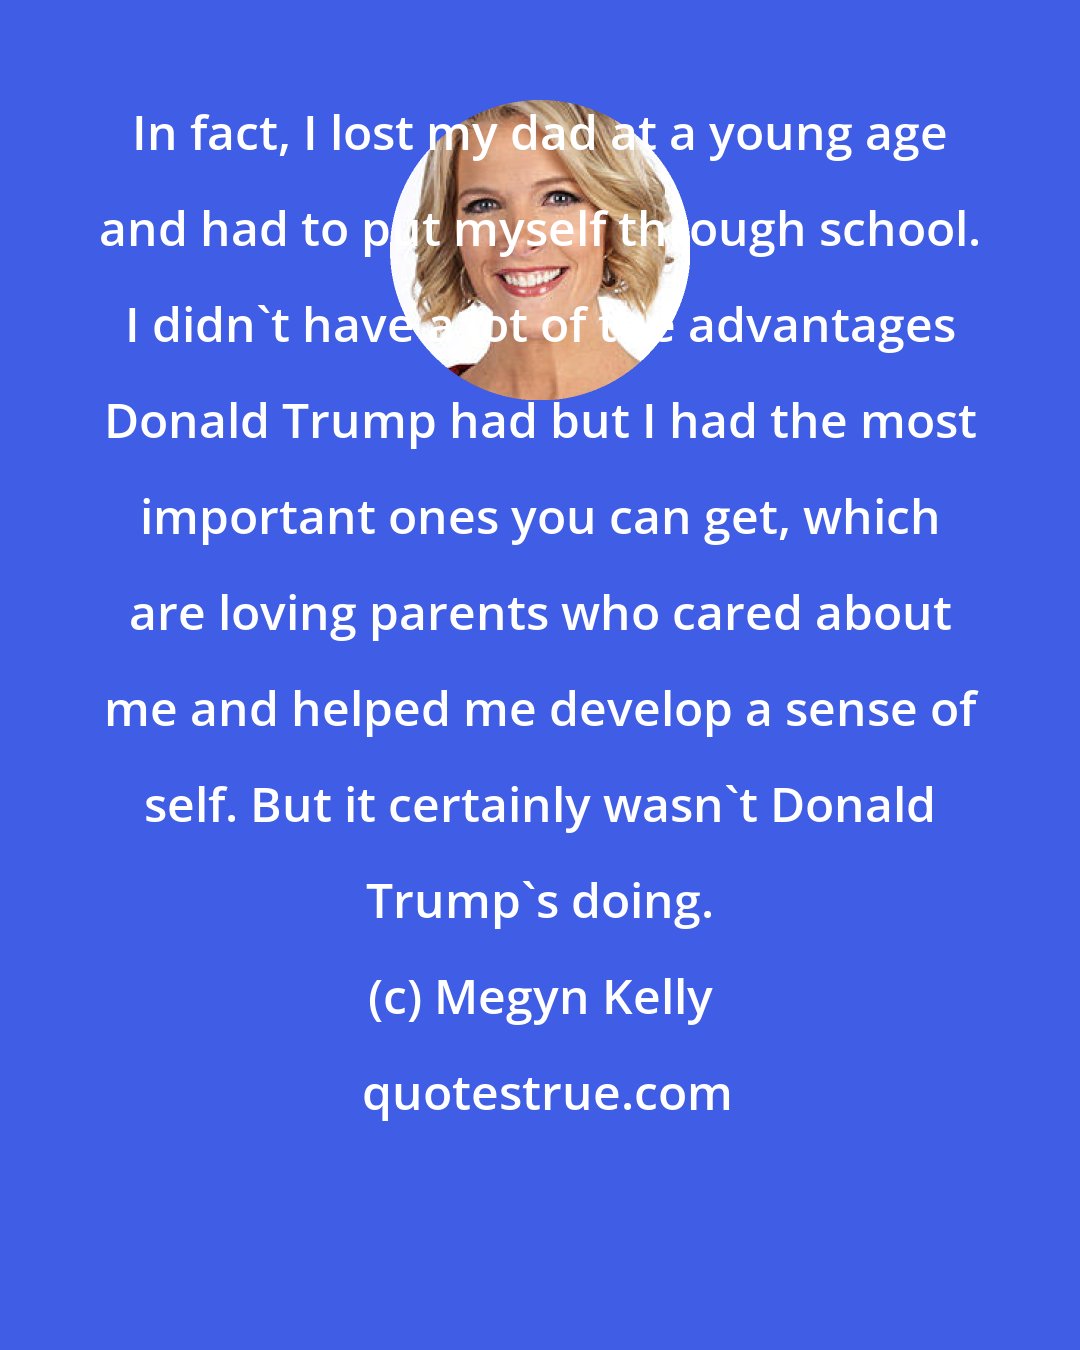 Megyn Kelly: In fact, I lost my dad at a young age and had to put myself through school. I didn't have a lot of the advantages Donald Trump had but I had the most important ones you can get, which are loving parents who cared about me and helped me develop a sense of self. But it certainly wasn't Donald Trump's doing.